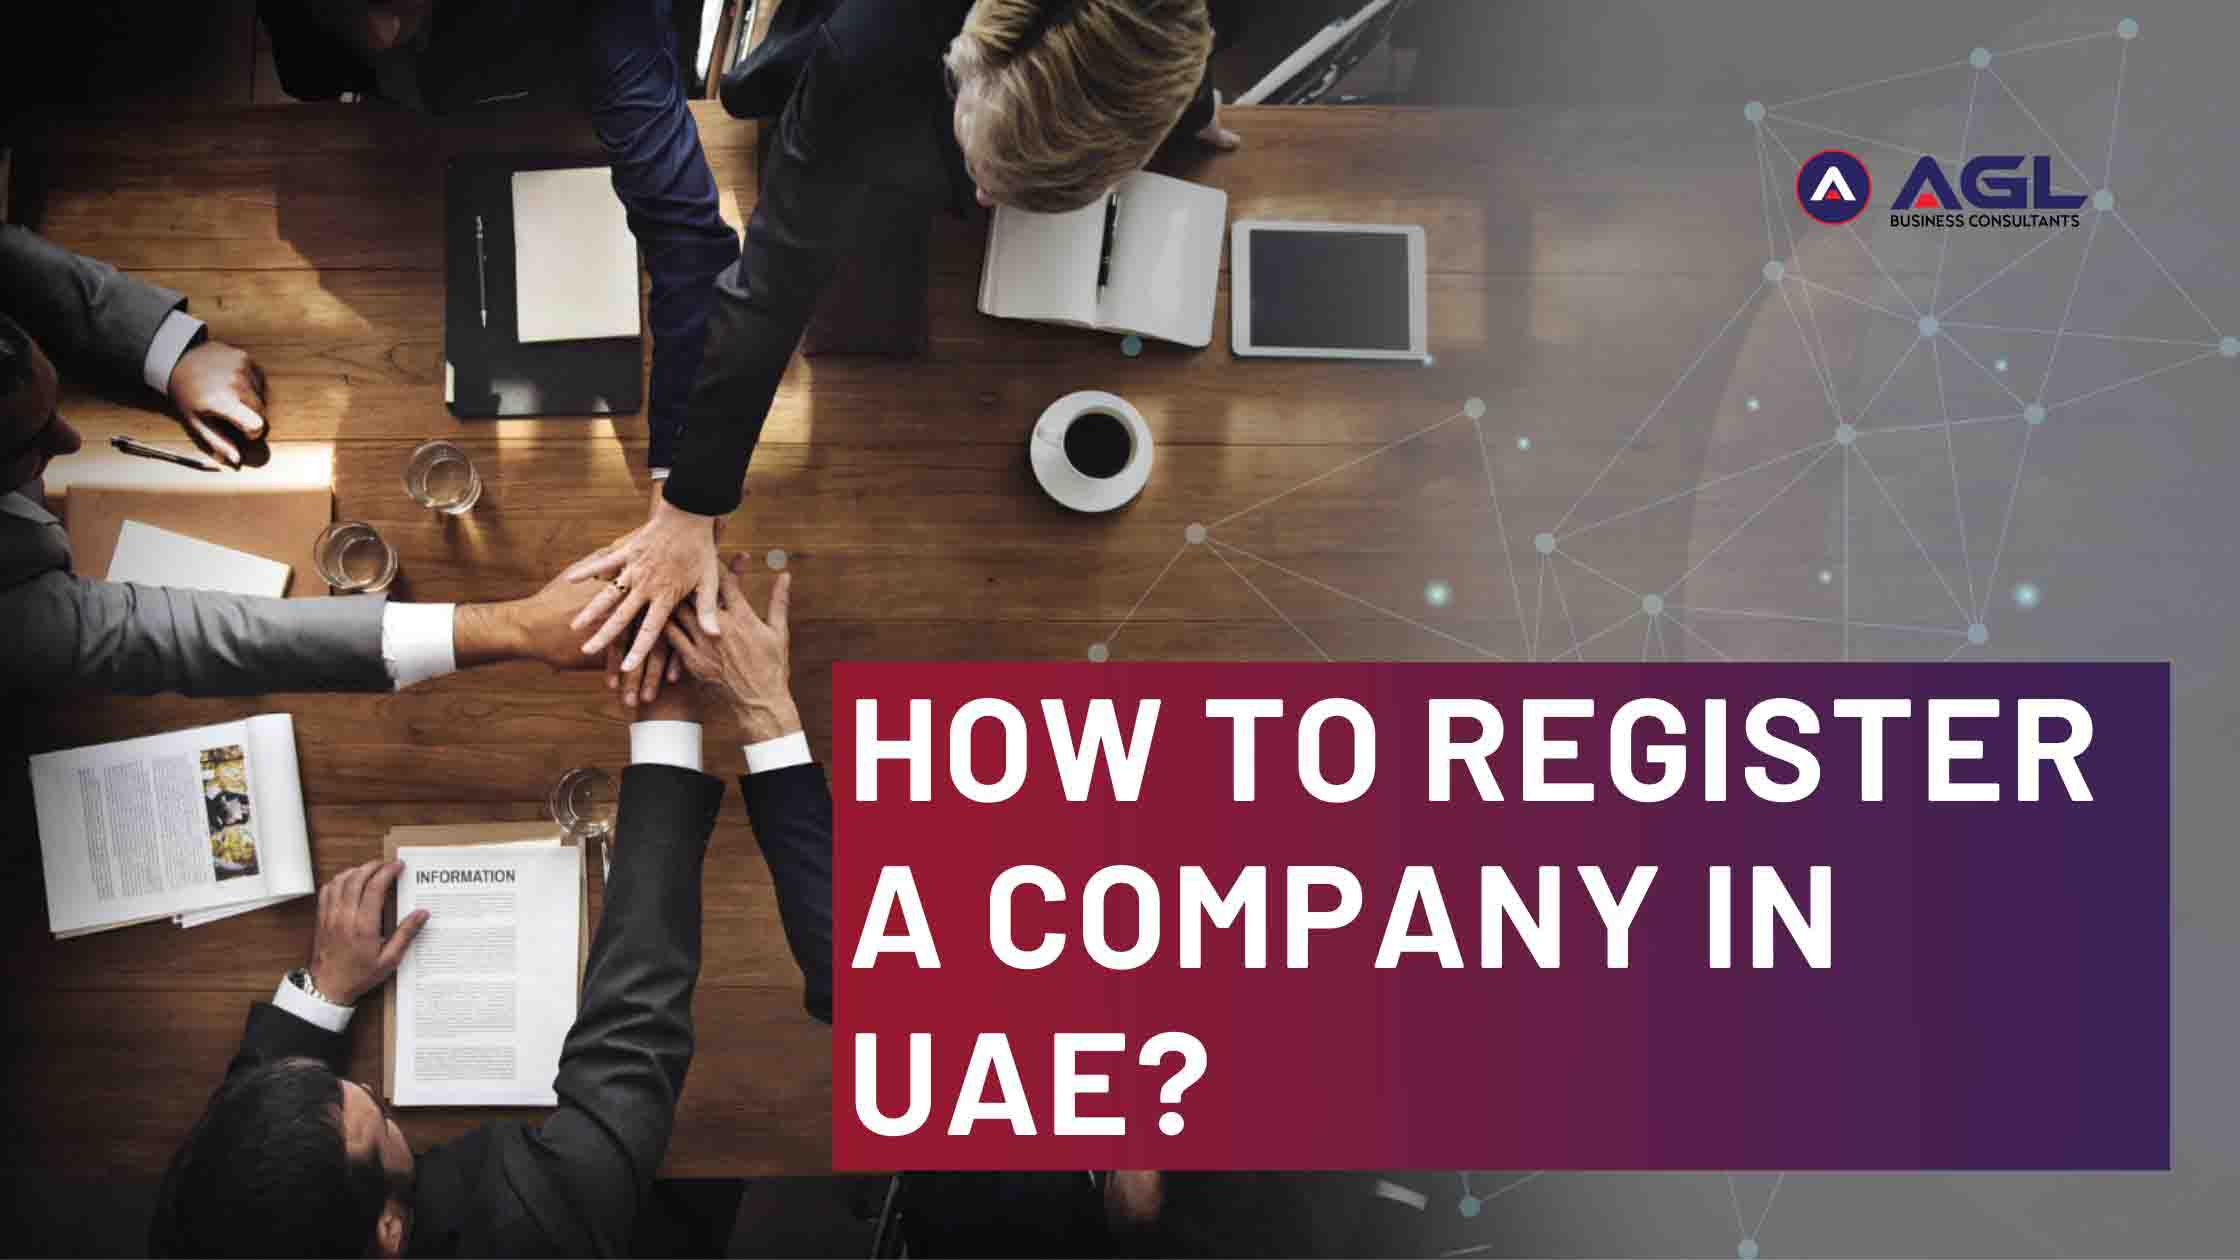 How To Register A Company in UAE?